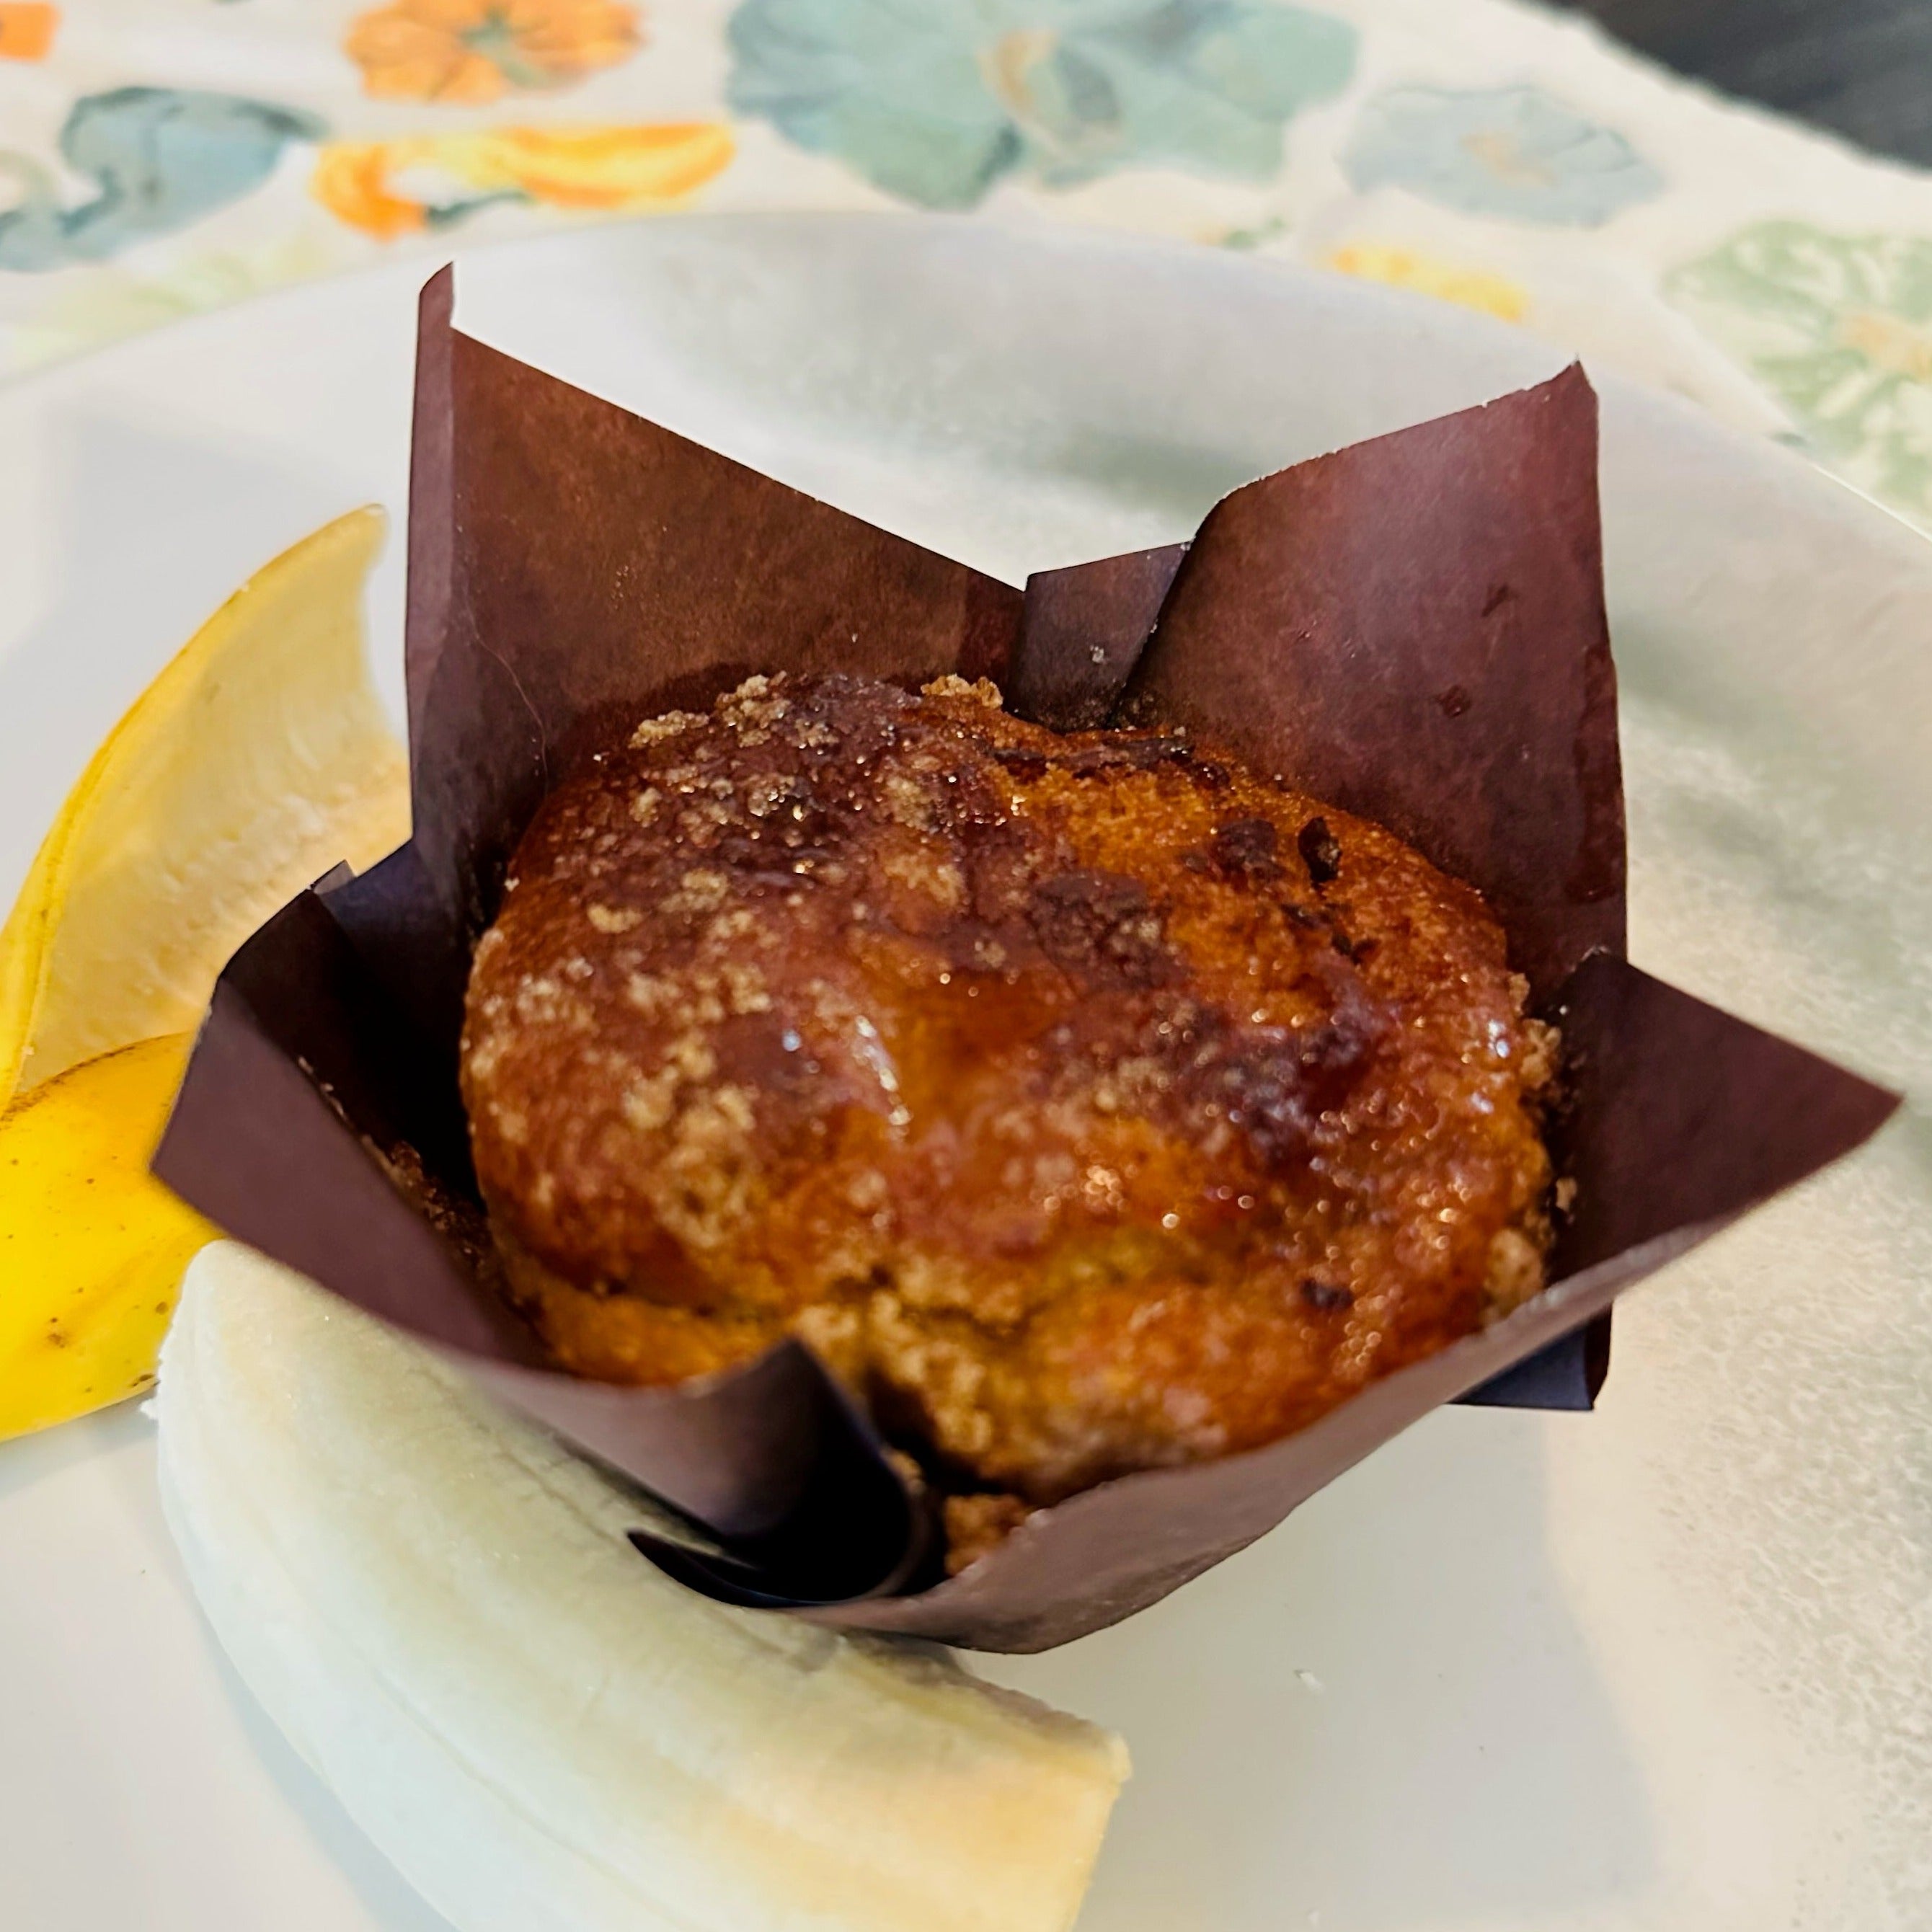 Coyote Kitchen: Banana Muffins - $6 - The Local Y'all